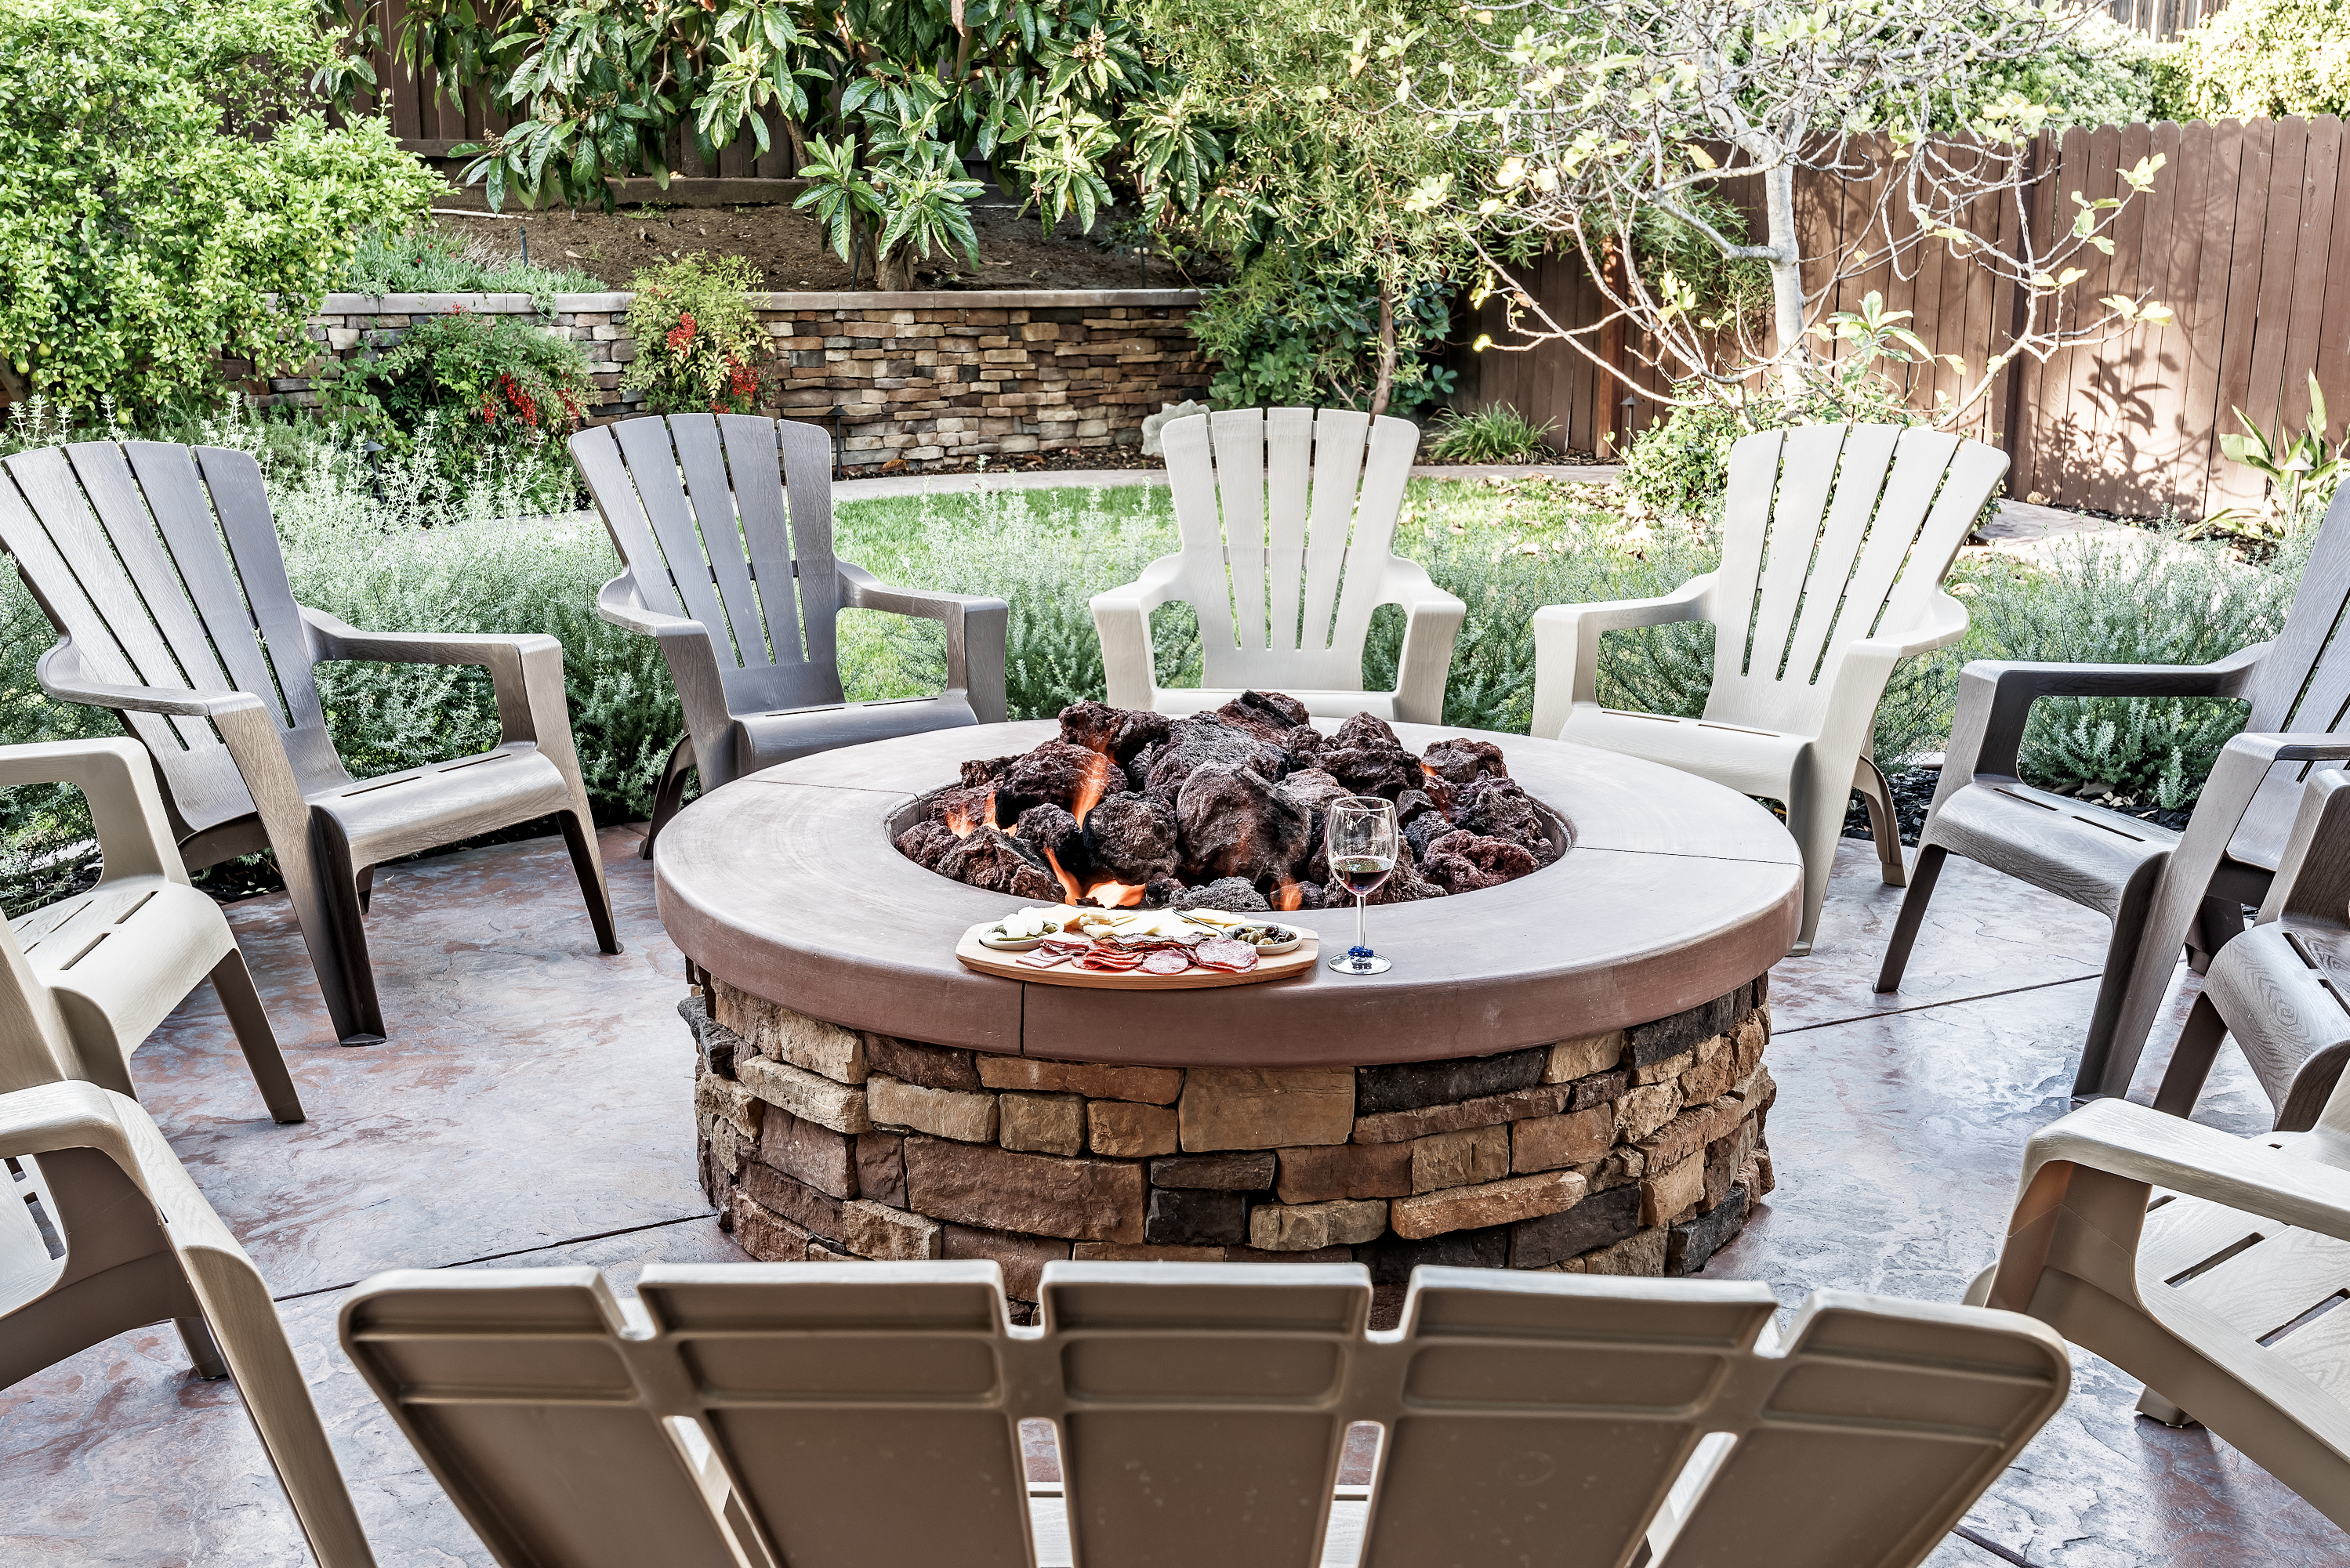 Outdoor Fire Pit Worth The Investment, How Much Does Fire Pit Patio Cost